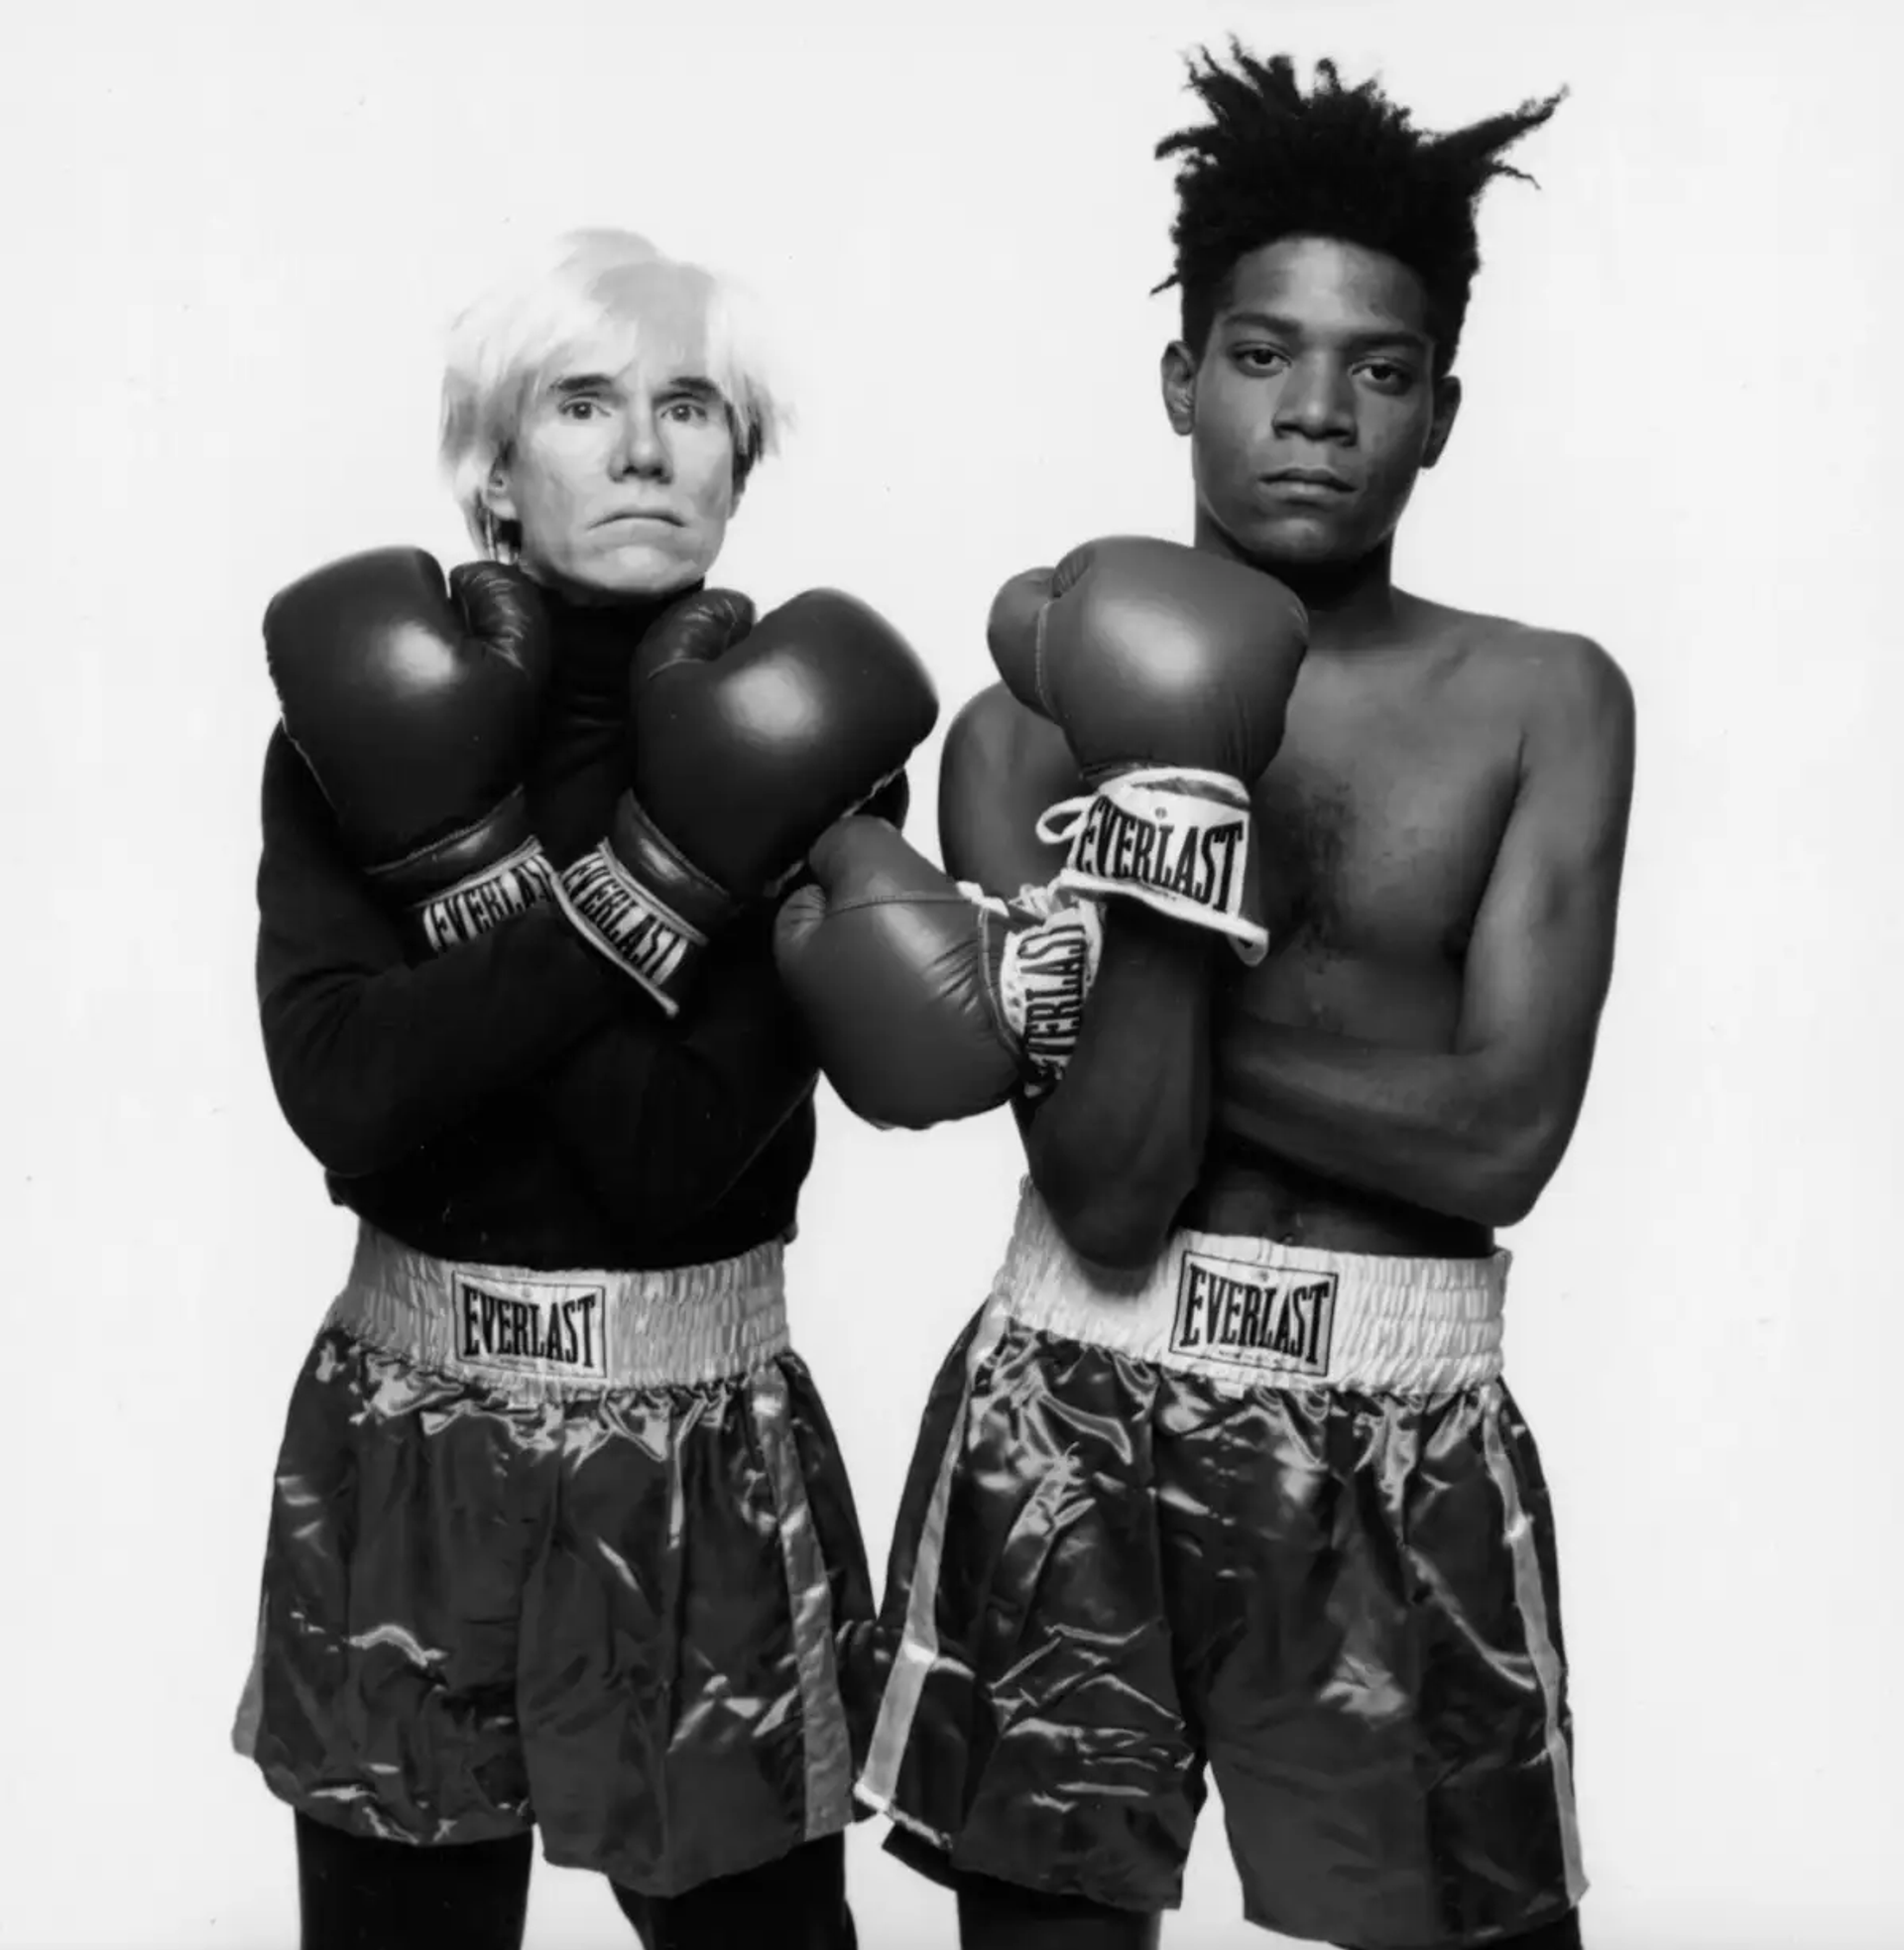 Andy Warhol & Basquiat in boxing gloves